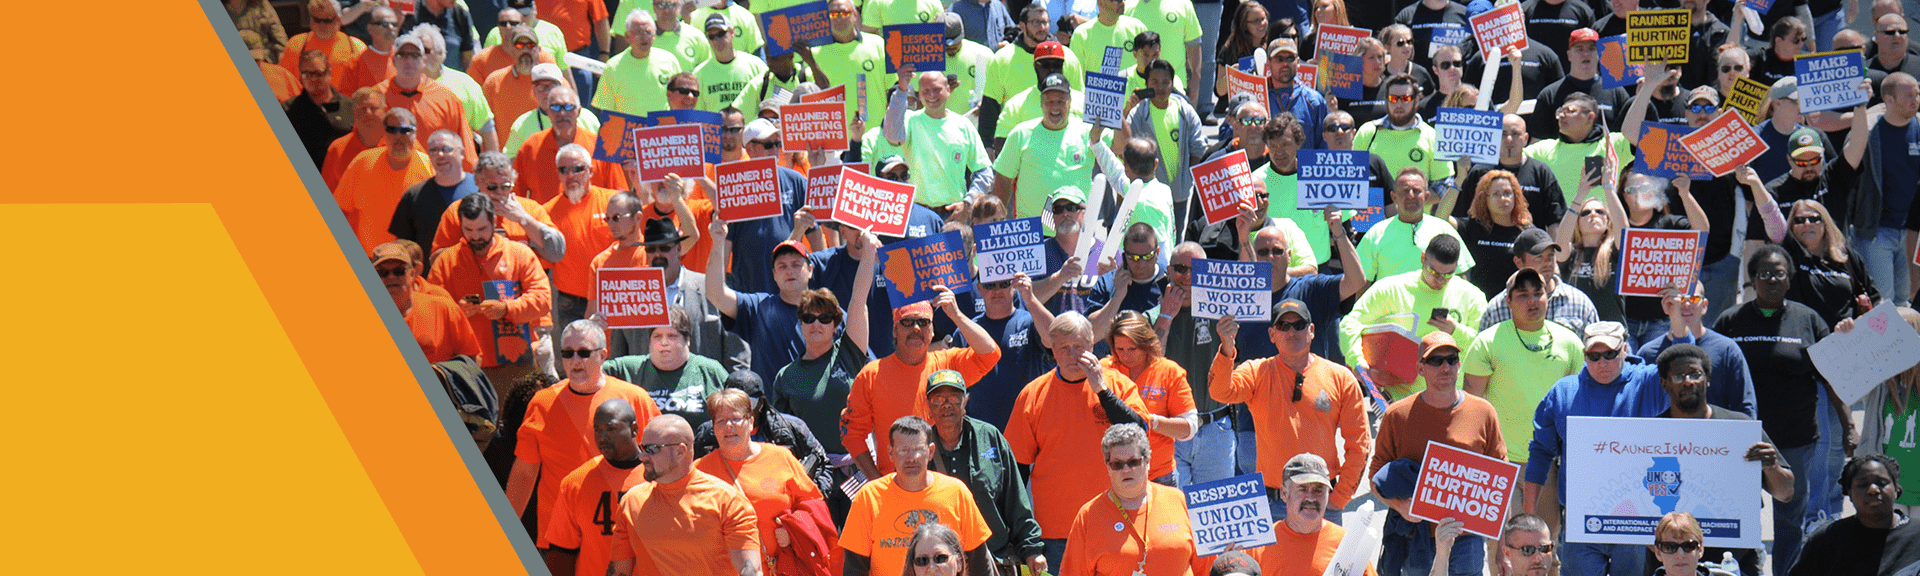 LiUNA Supporters Crowd Protest